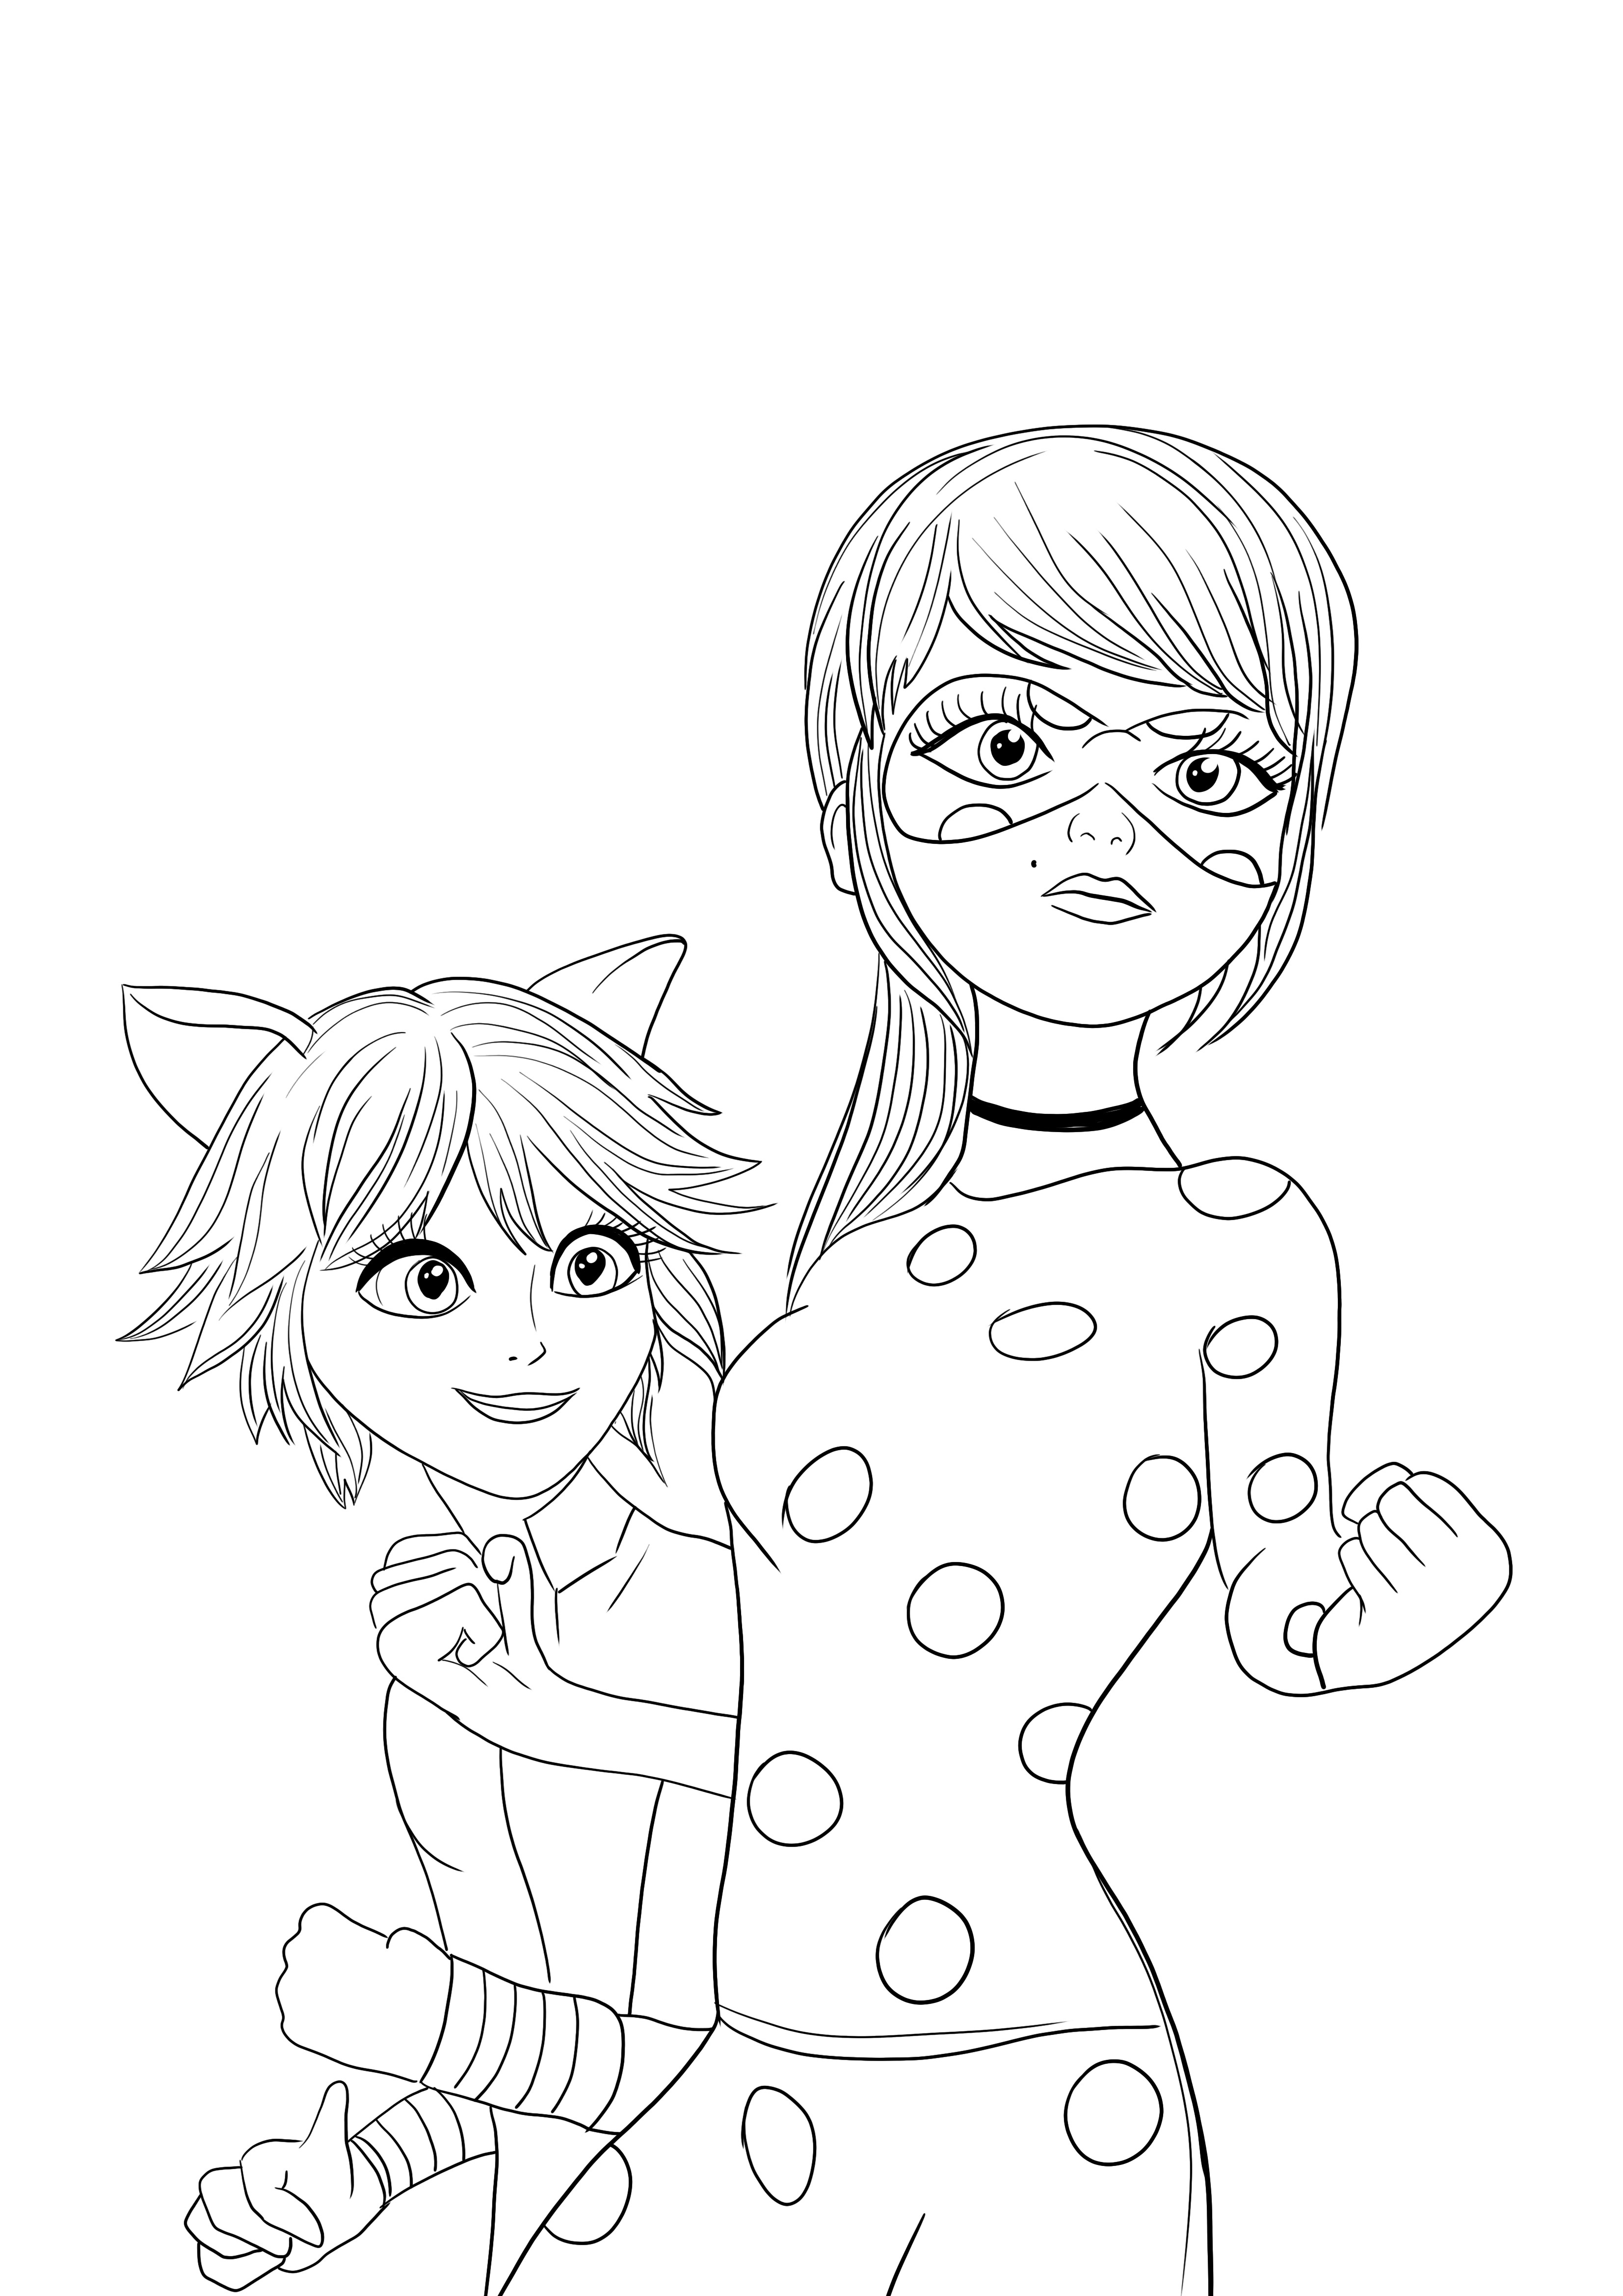 Lady Bug and Cat Noir for free printing sheet